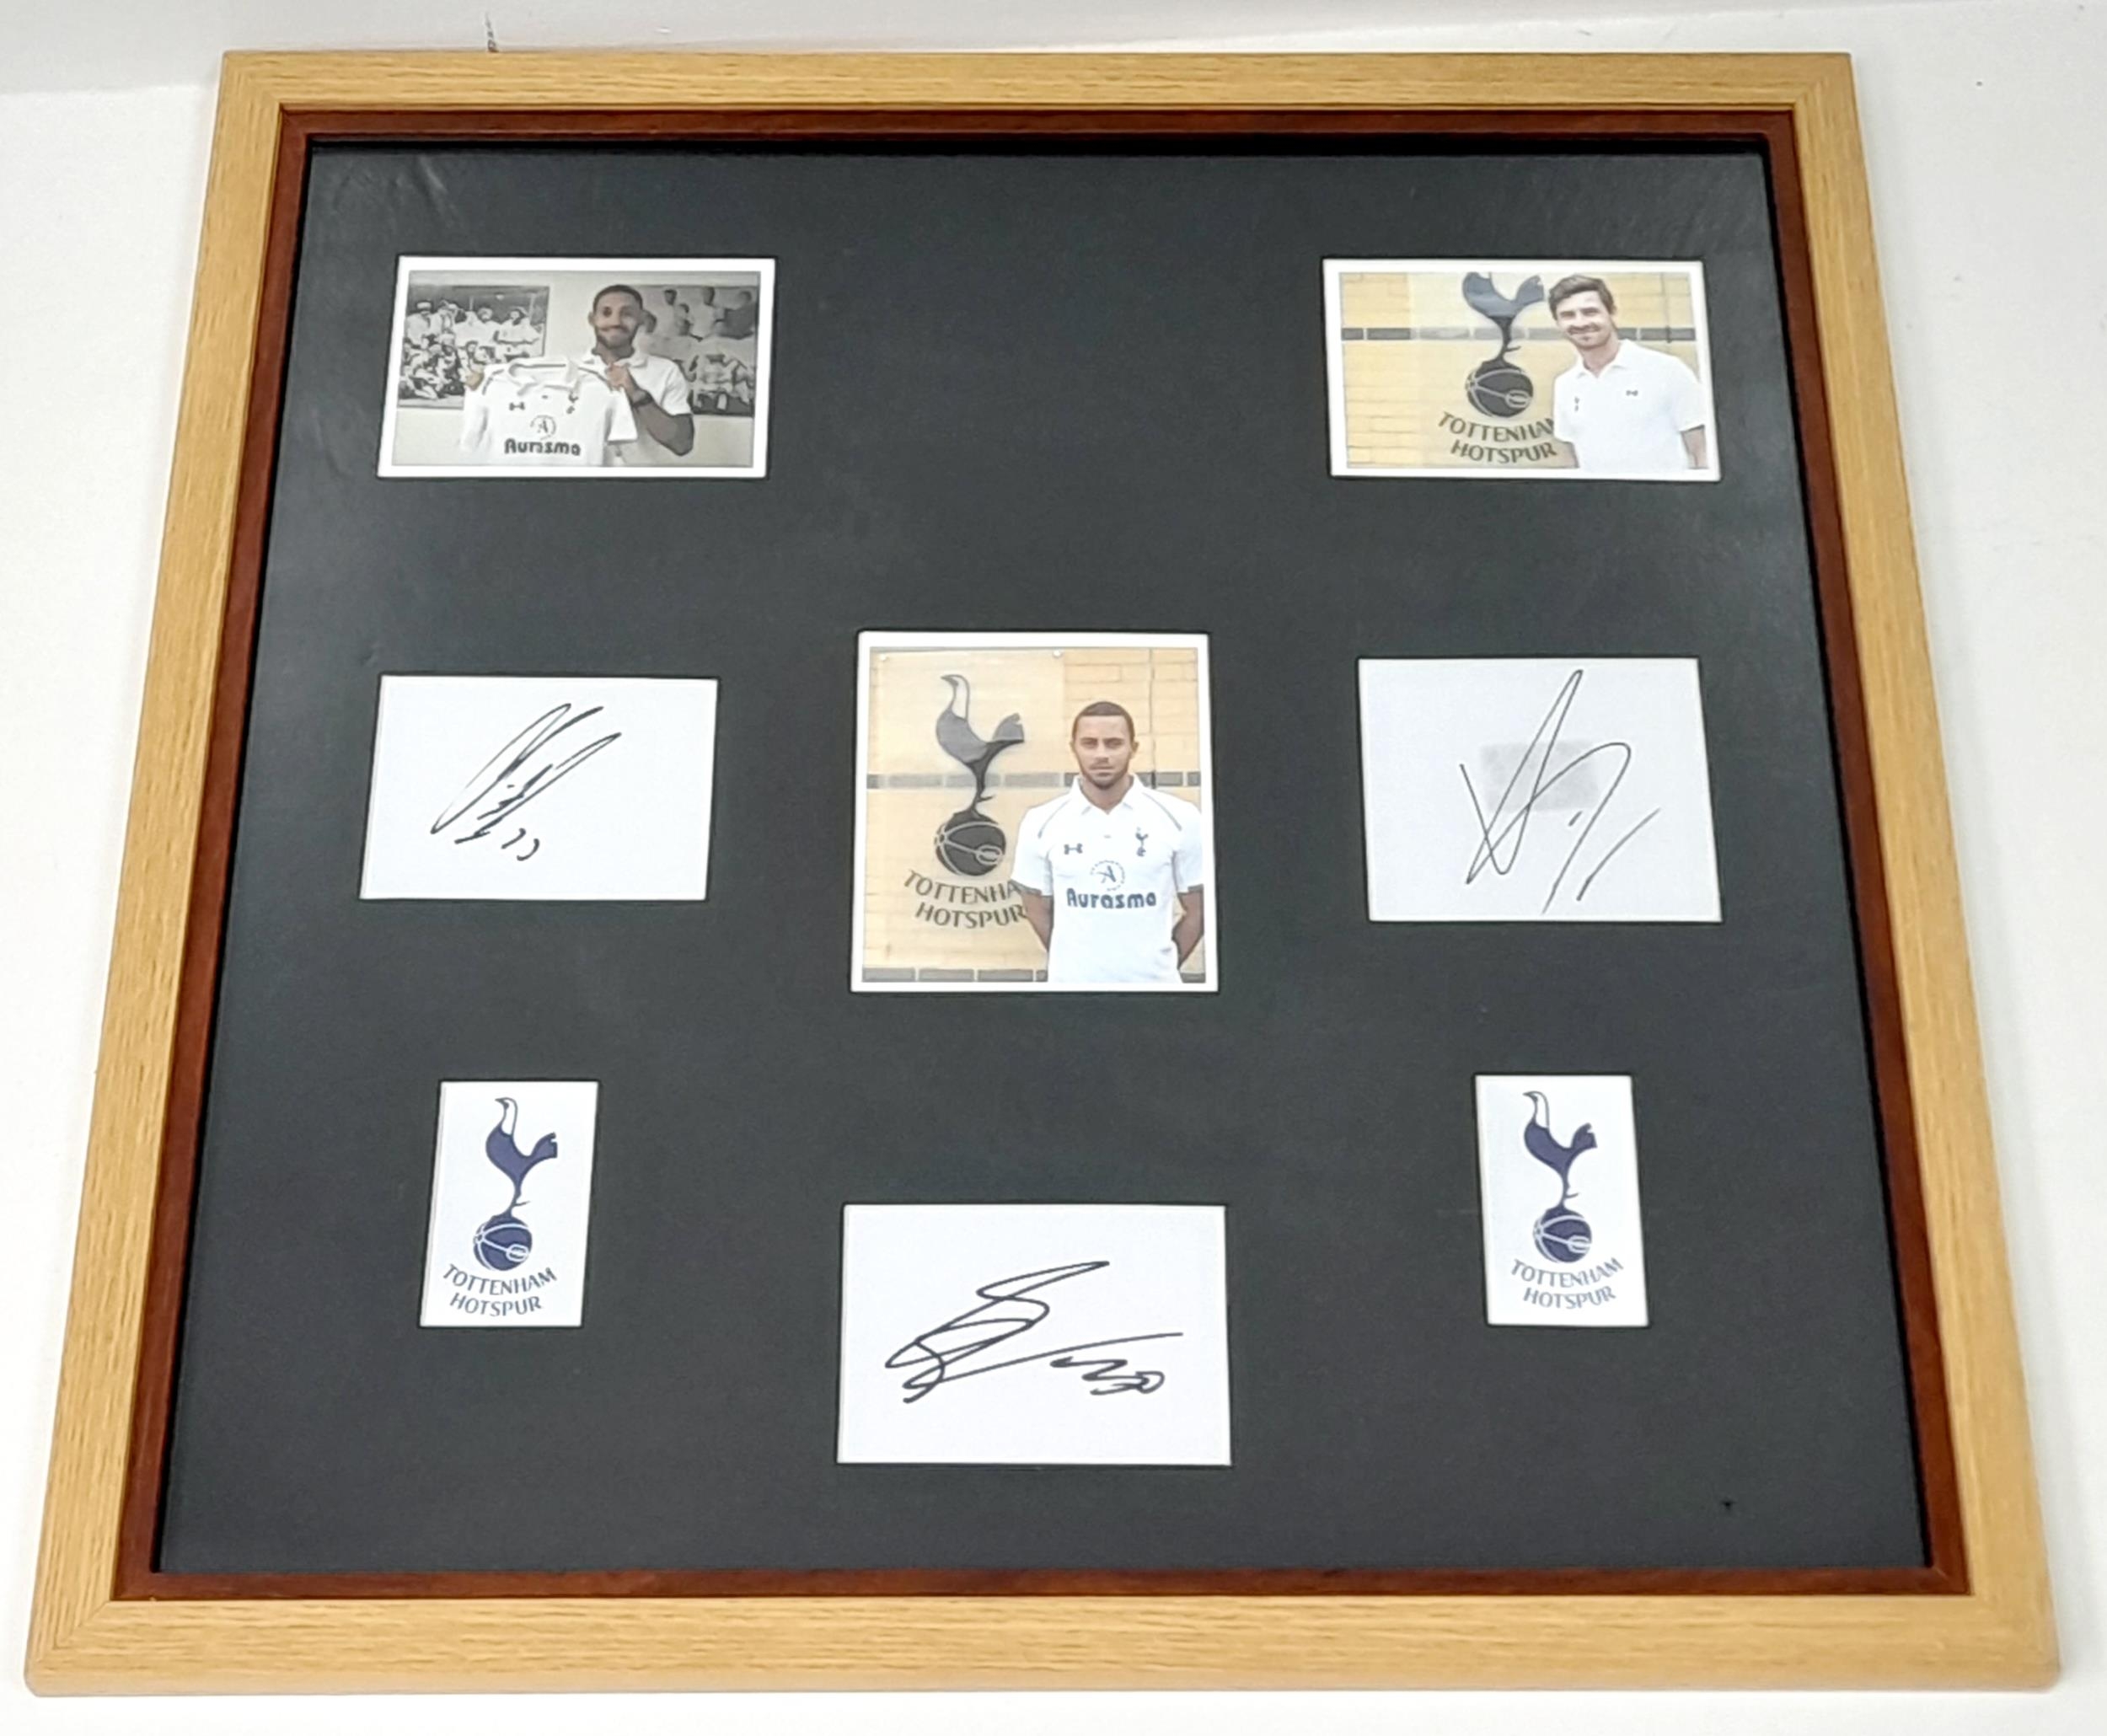 A Signed Tottenham FC Framed Signed Picture of Two Spurs Player and Manager. Clint Dempsey, Mousa